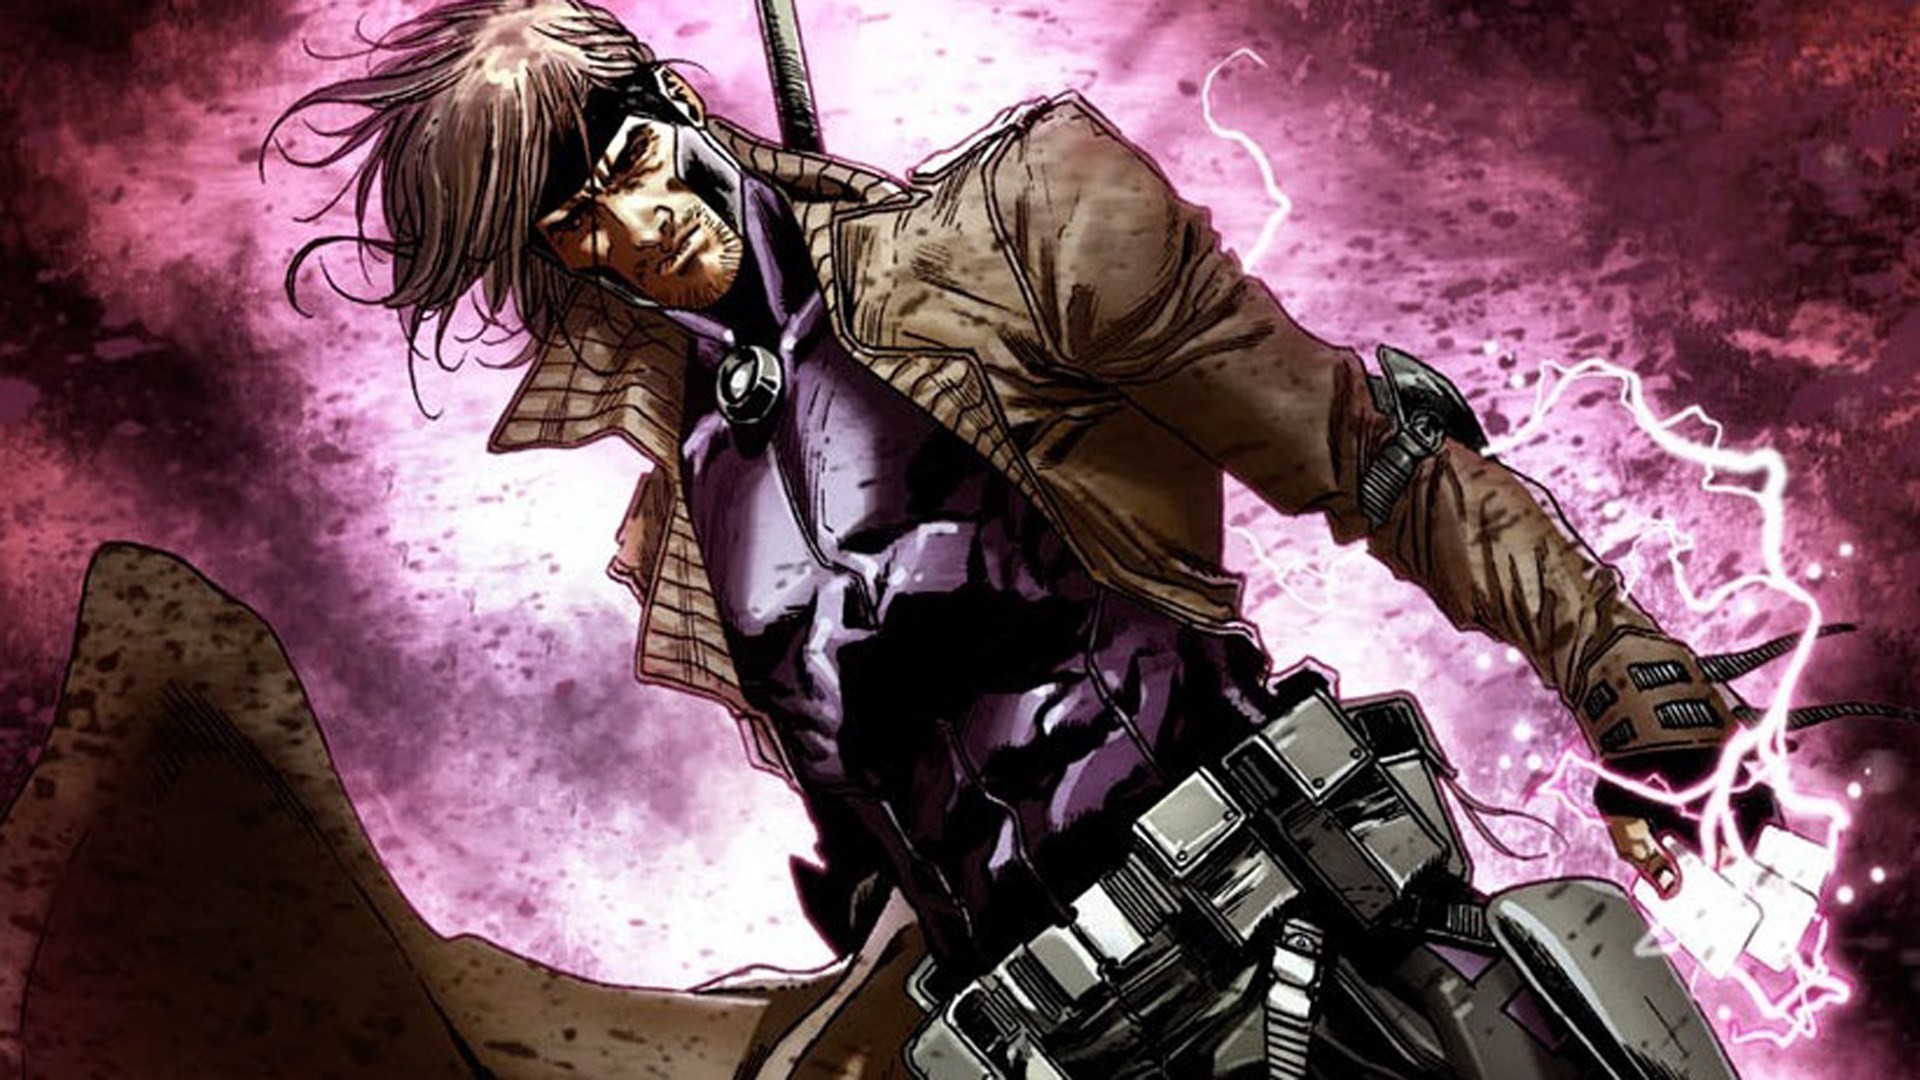 Gambit Spinoff Film Still in the Works, Says Channing Tatum – Geek Outpost